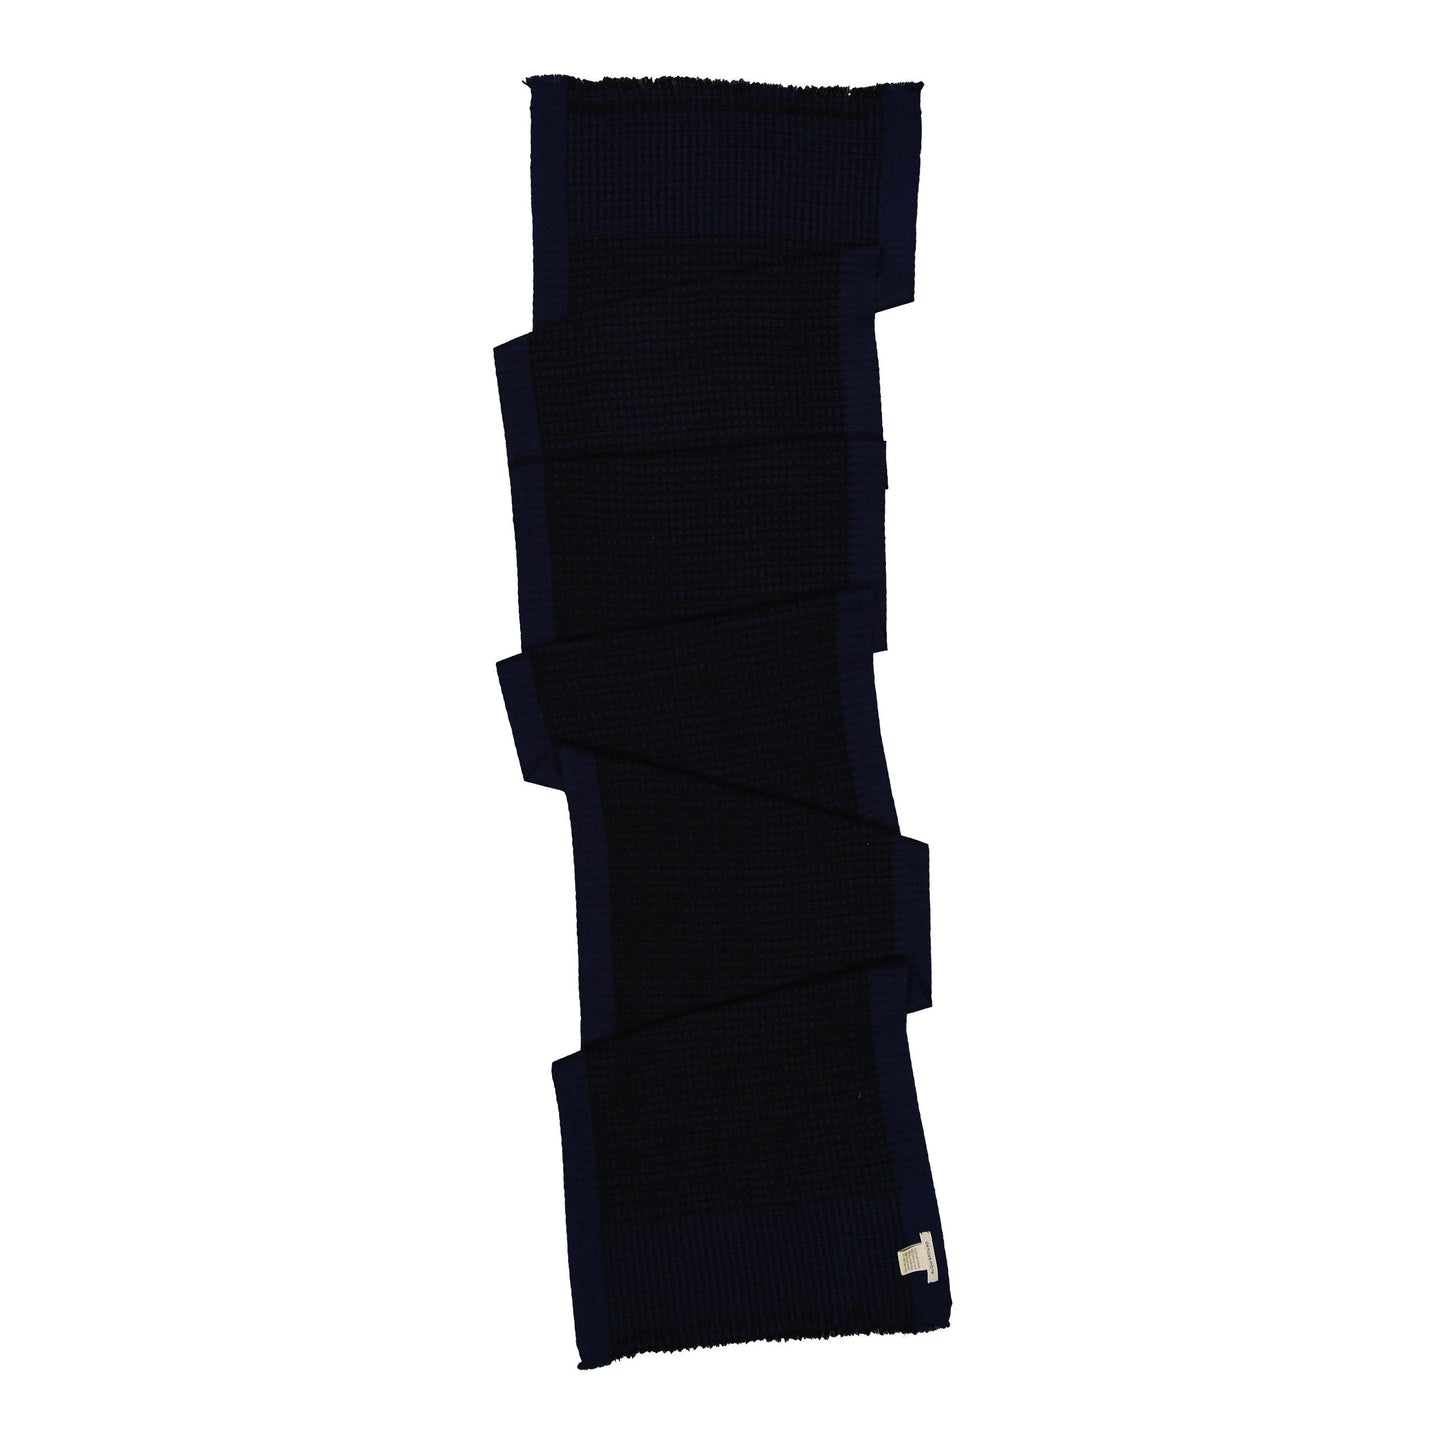 STRUCTURE - a neat and precise scarf NAVY BLUE BLACK